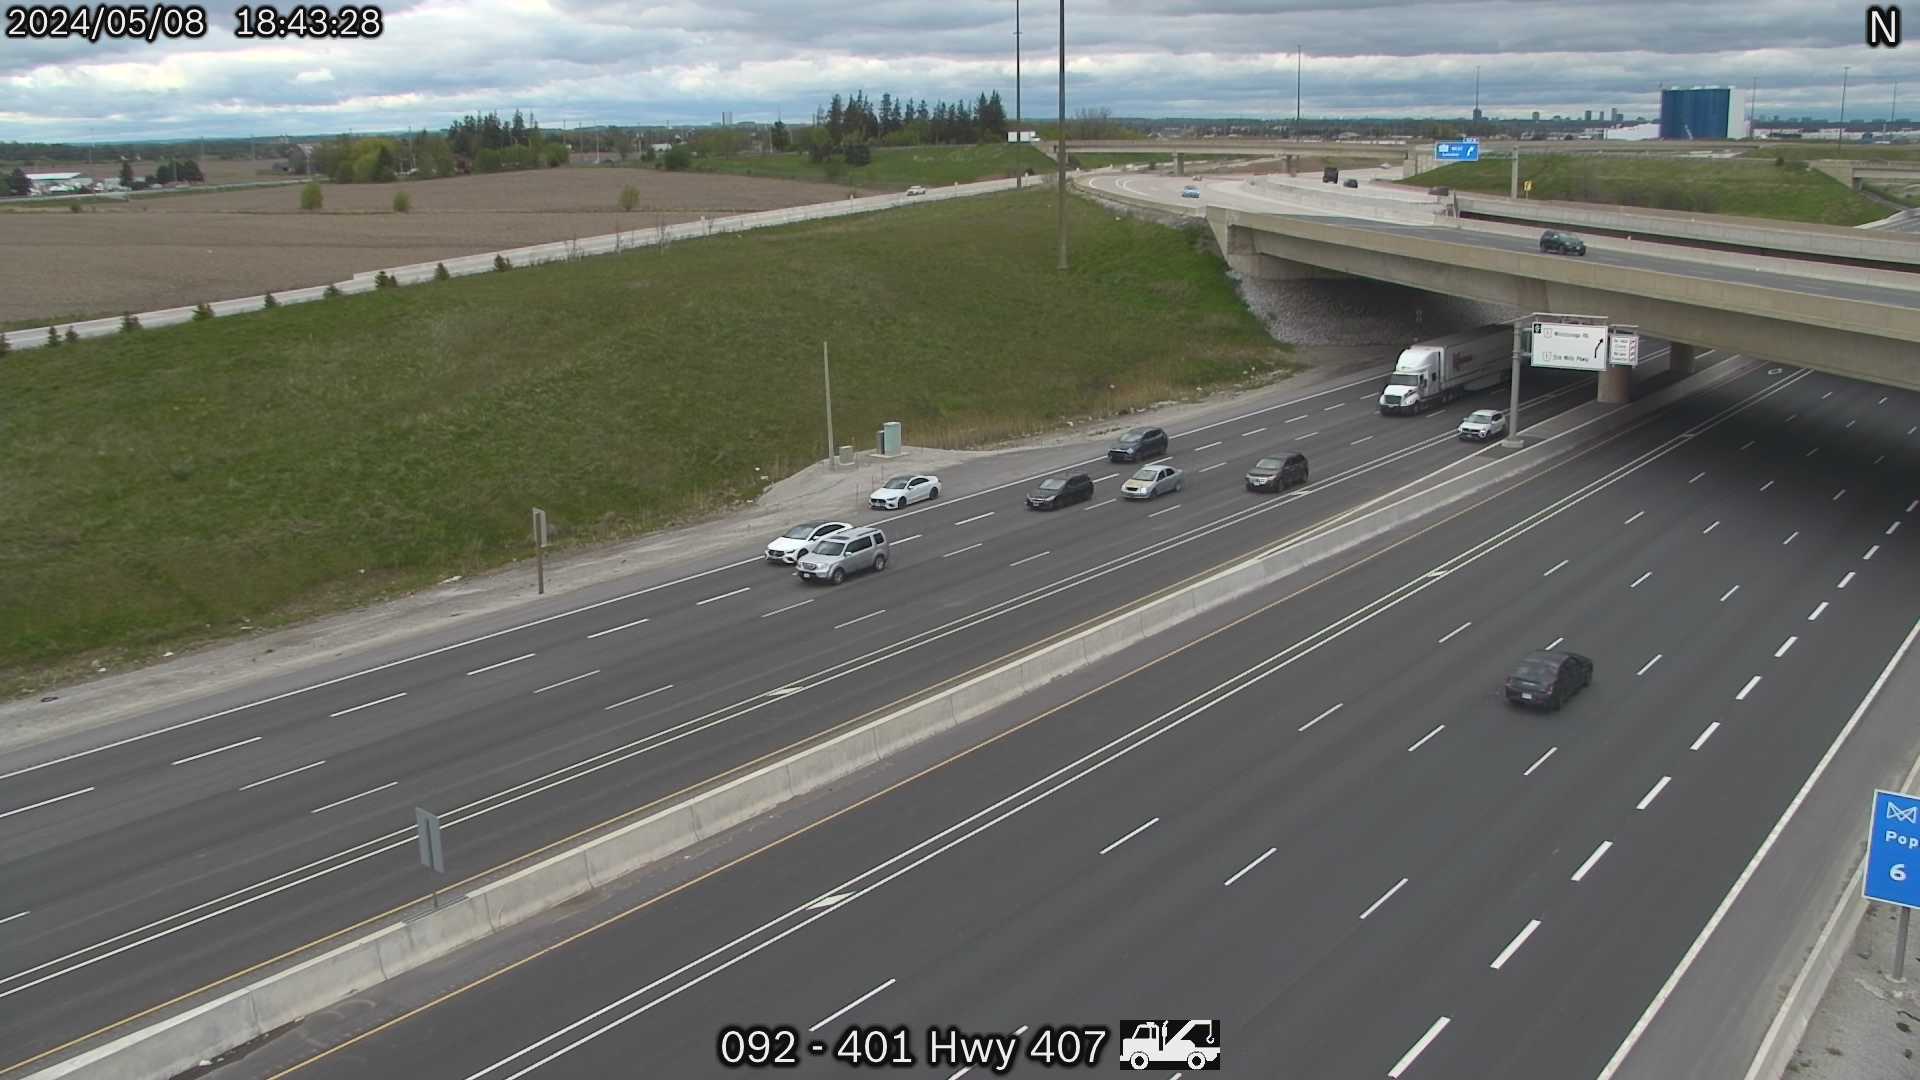 Webcam of South side of Highway 401 near Port Union Rd courtesy of the MTO